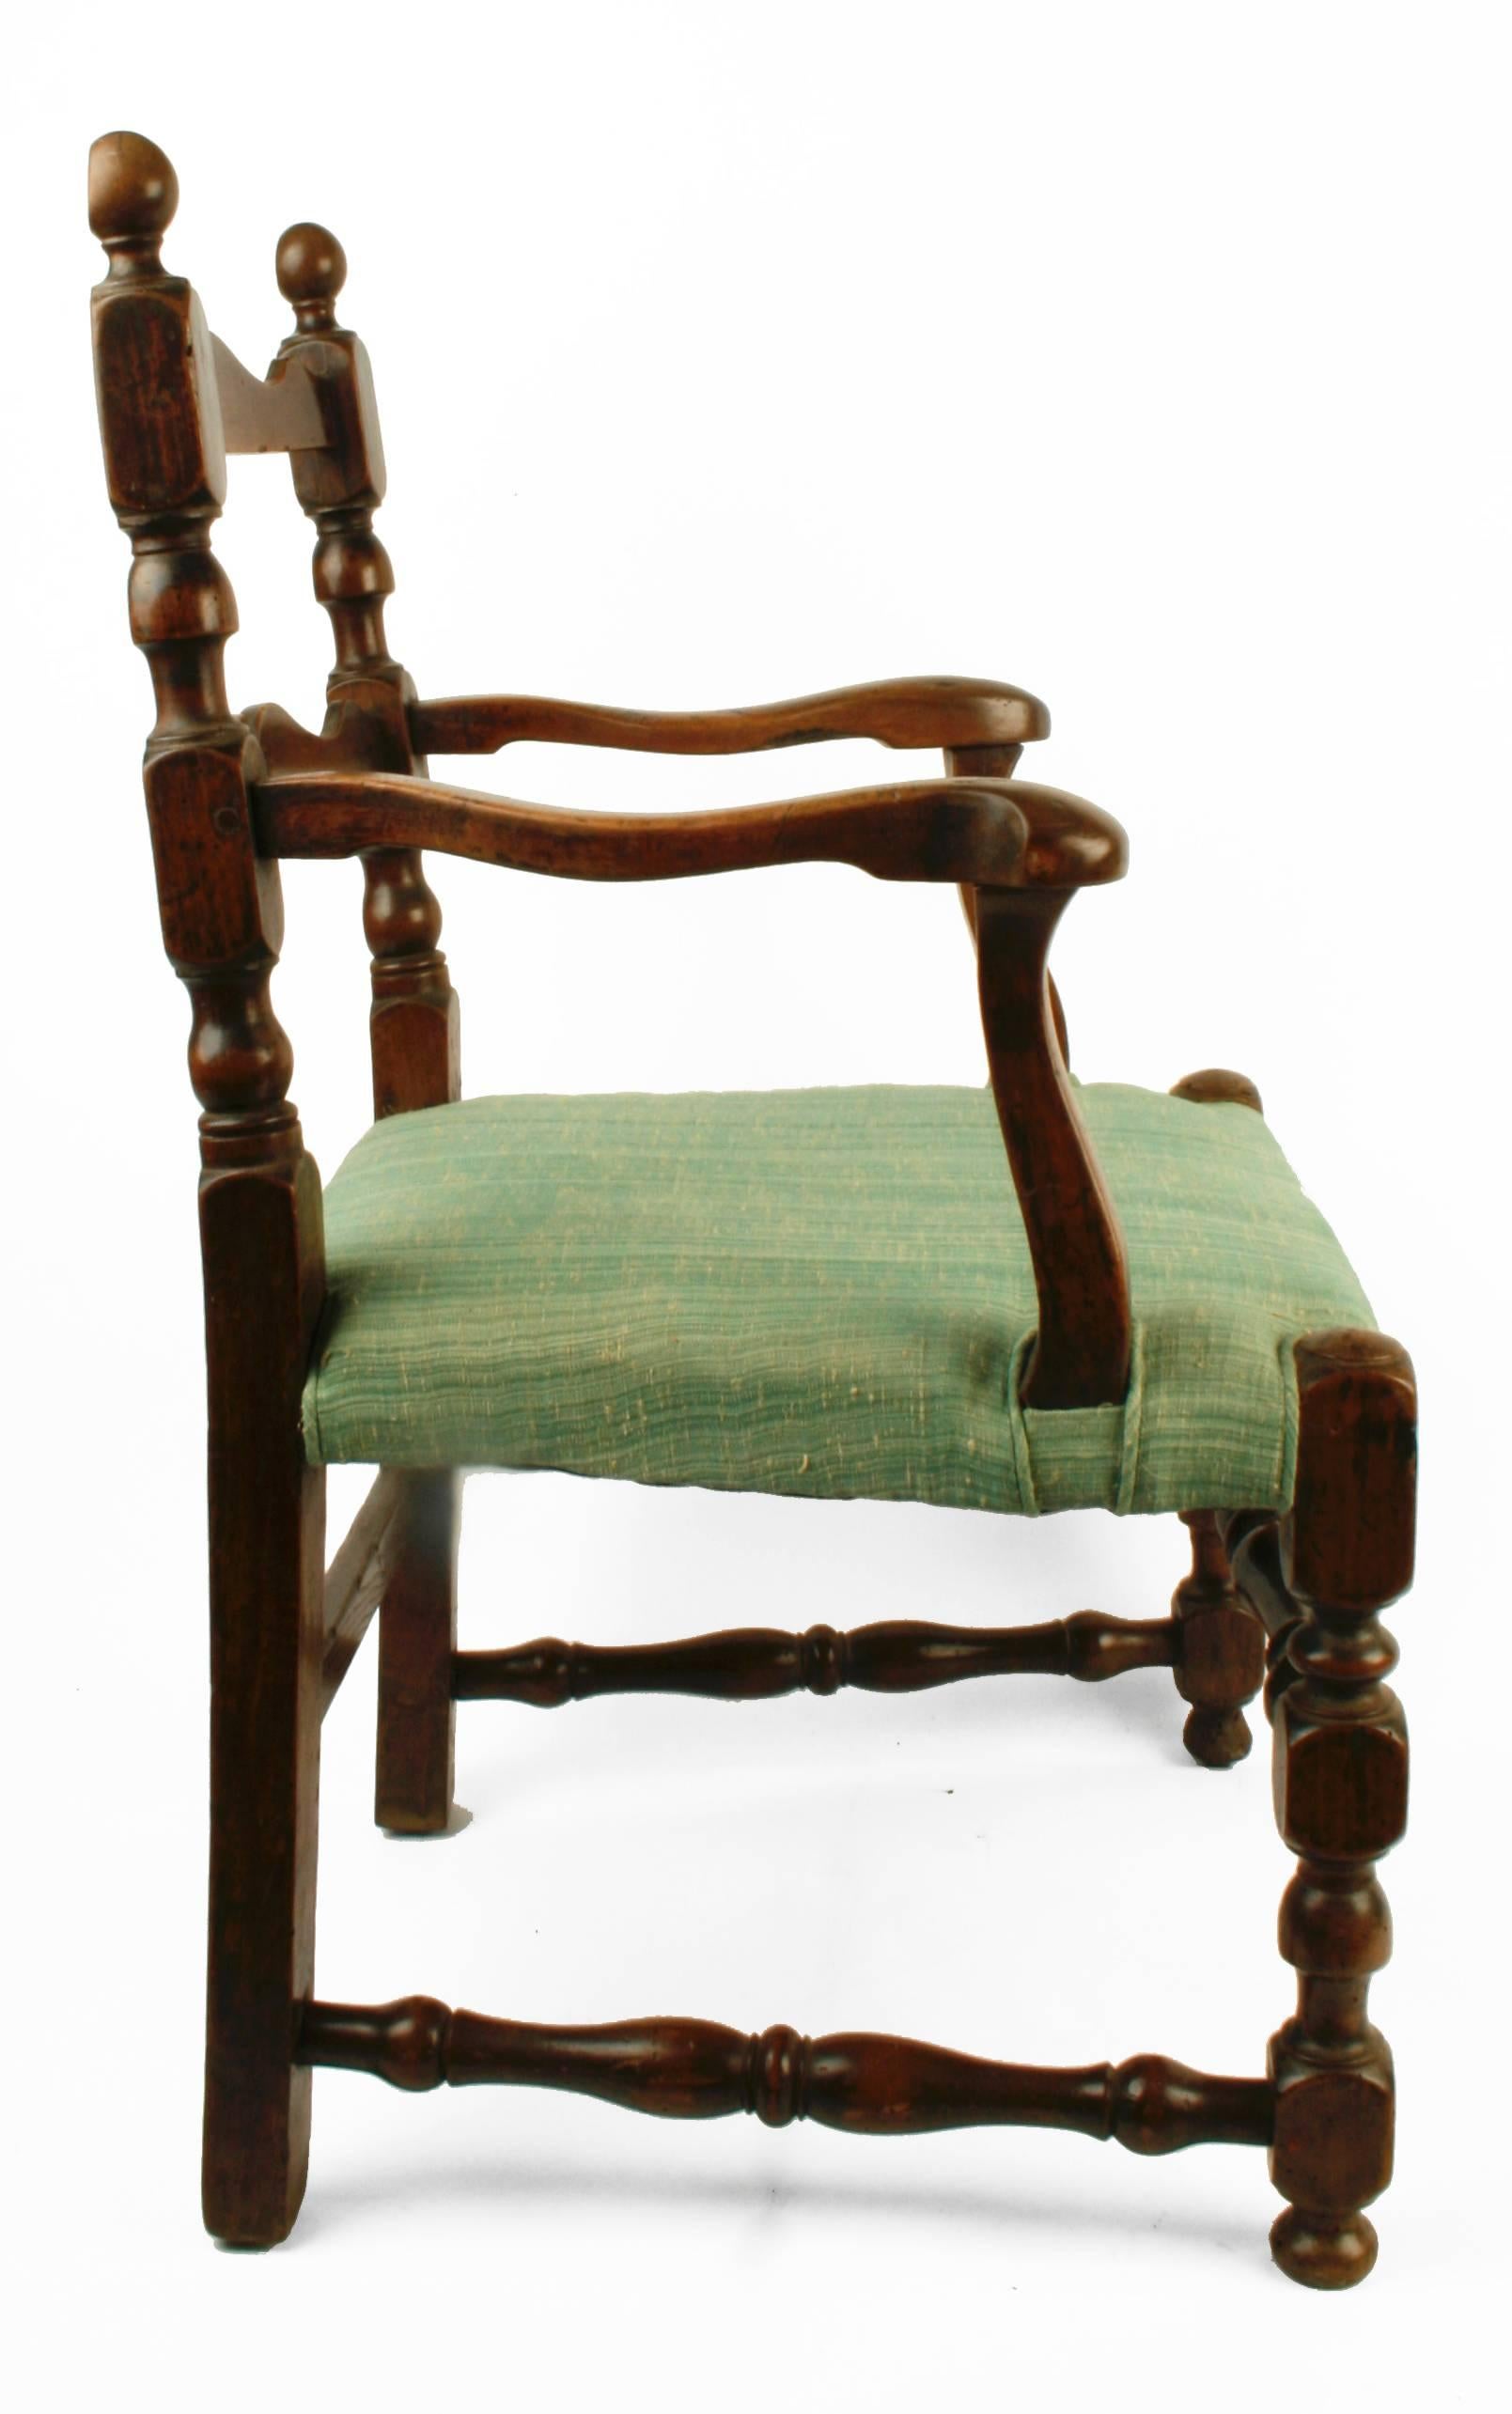 This handsome French armchair is made of Walnut with an upholstered seat and open back. It has turned uprights, front legs and stretchers. The uprights are topped with flat back finials. The back rails are scalloped with soft curving arms. A green